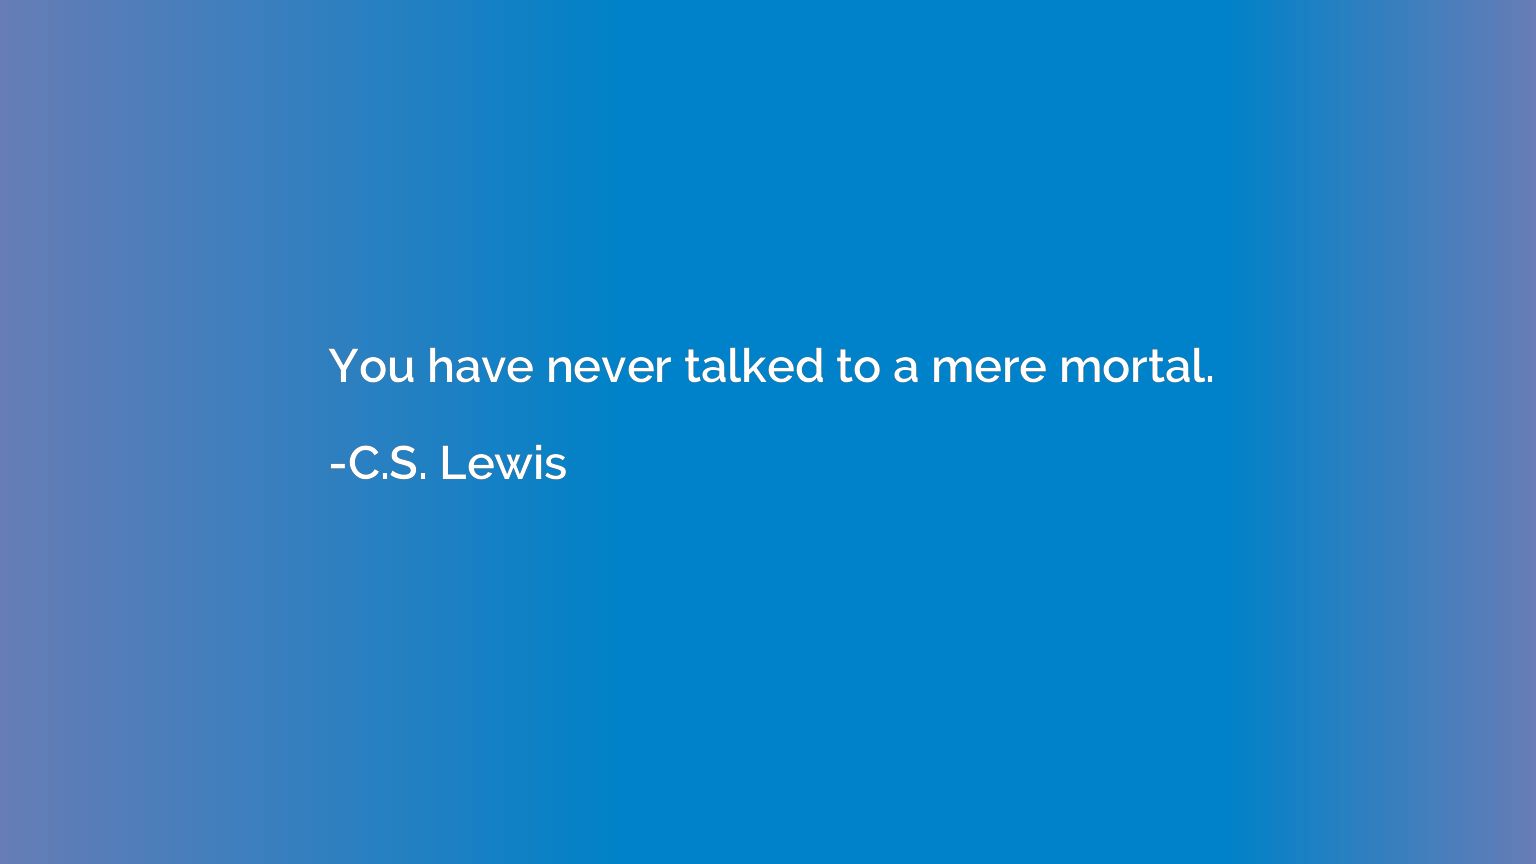 You have never talked to a mere mortal.